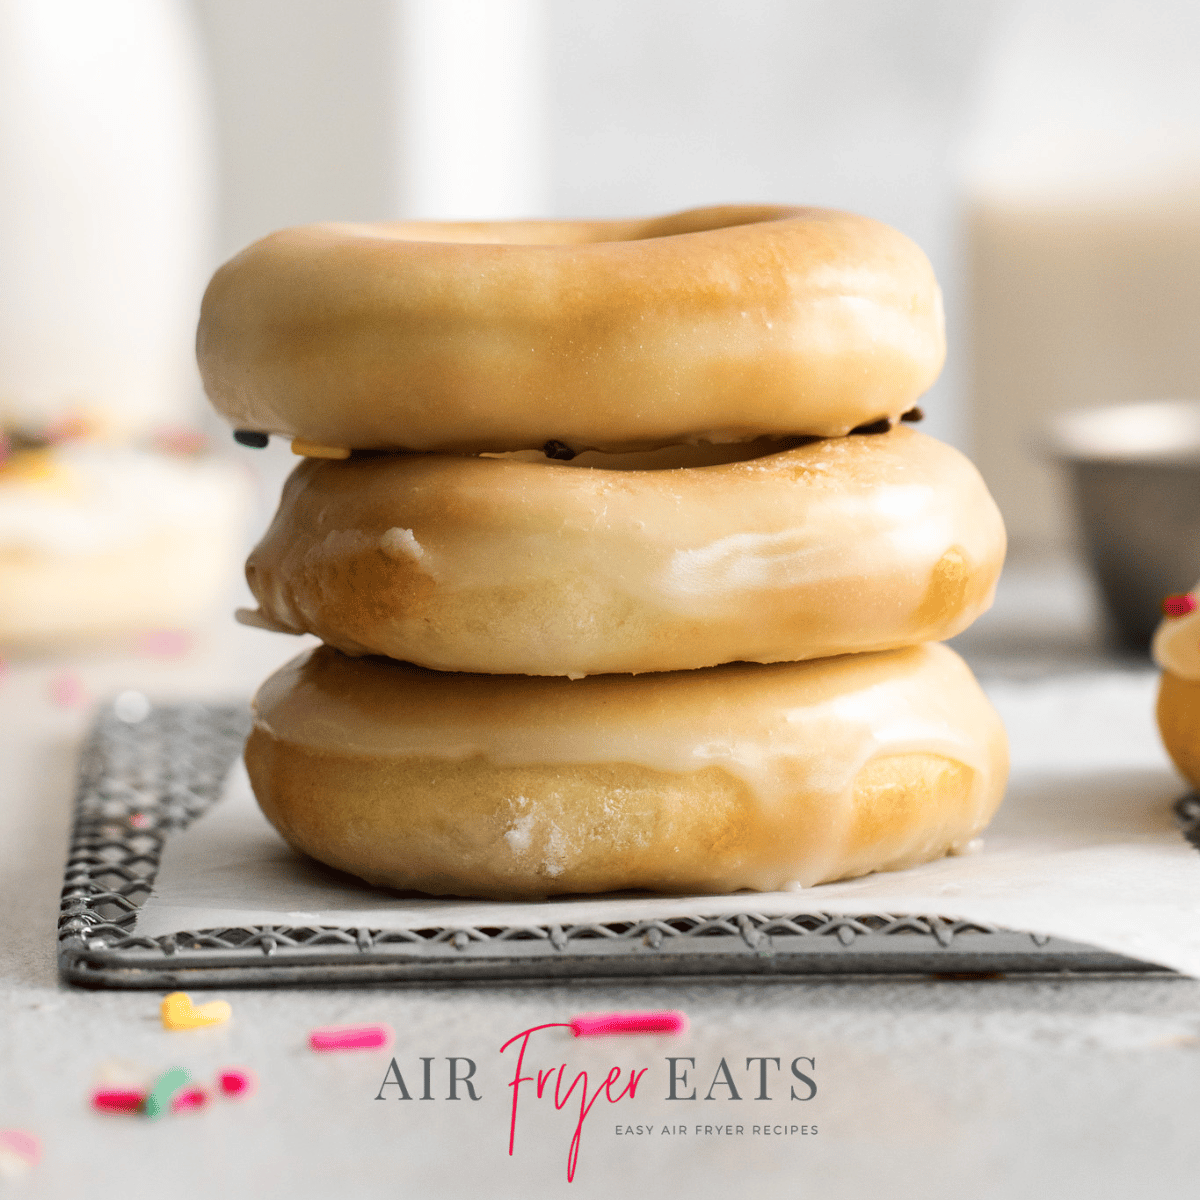 Photo of a stack of 3 glazed Air Fryer Donuts, on a cooling rack and ready to eat.